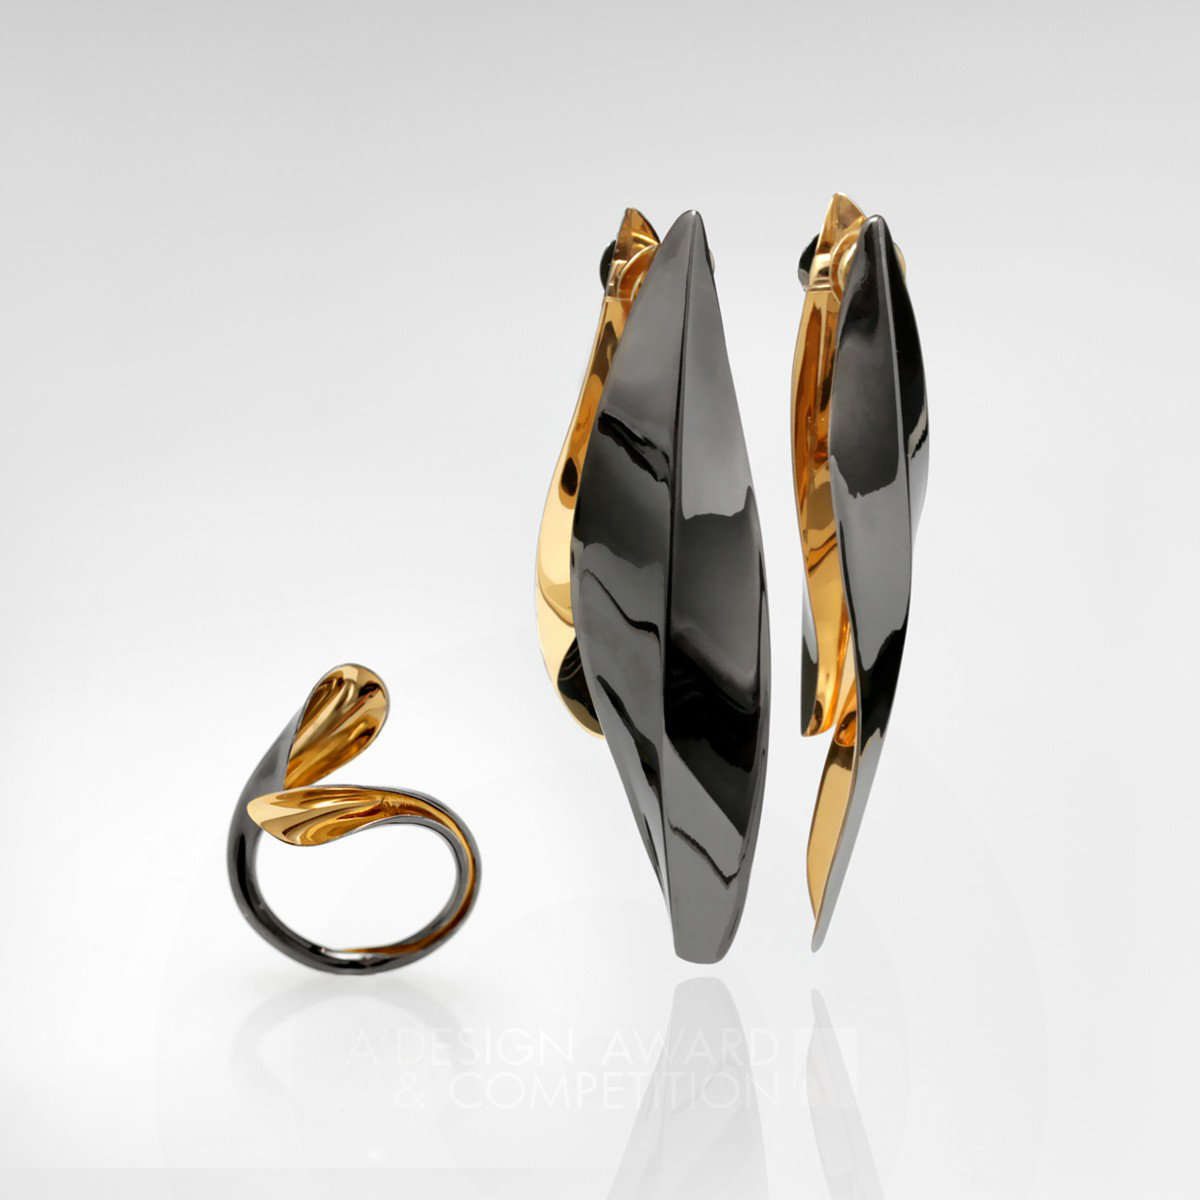 Vivit Collection Earrings and Ring by Brazil & Murgel